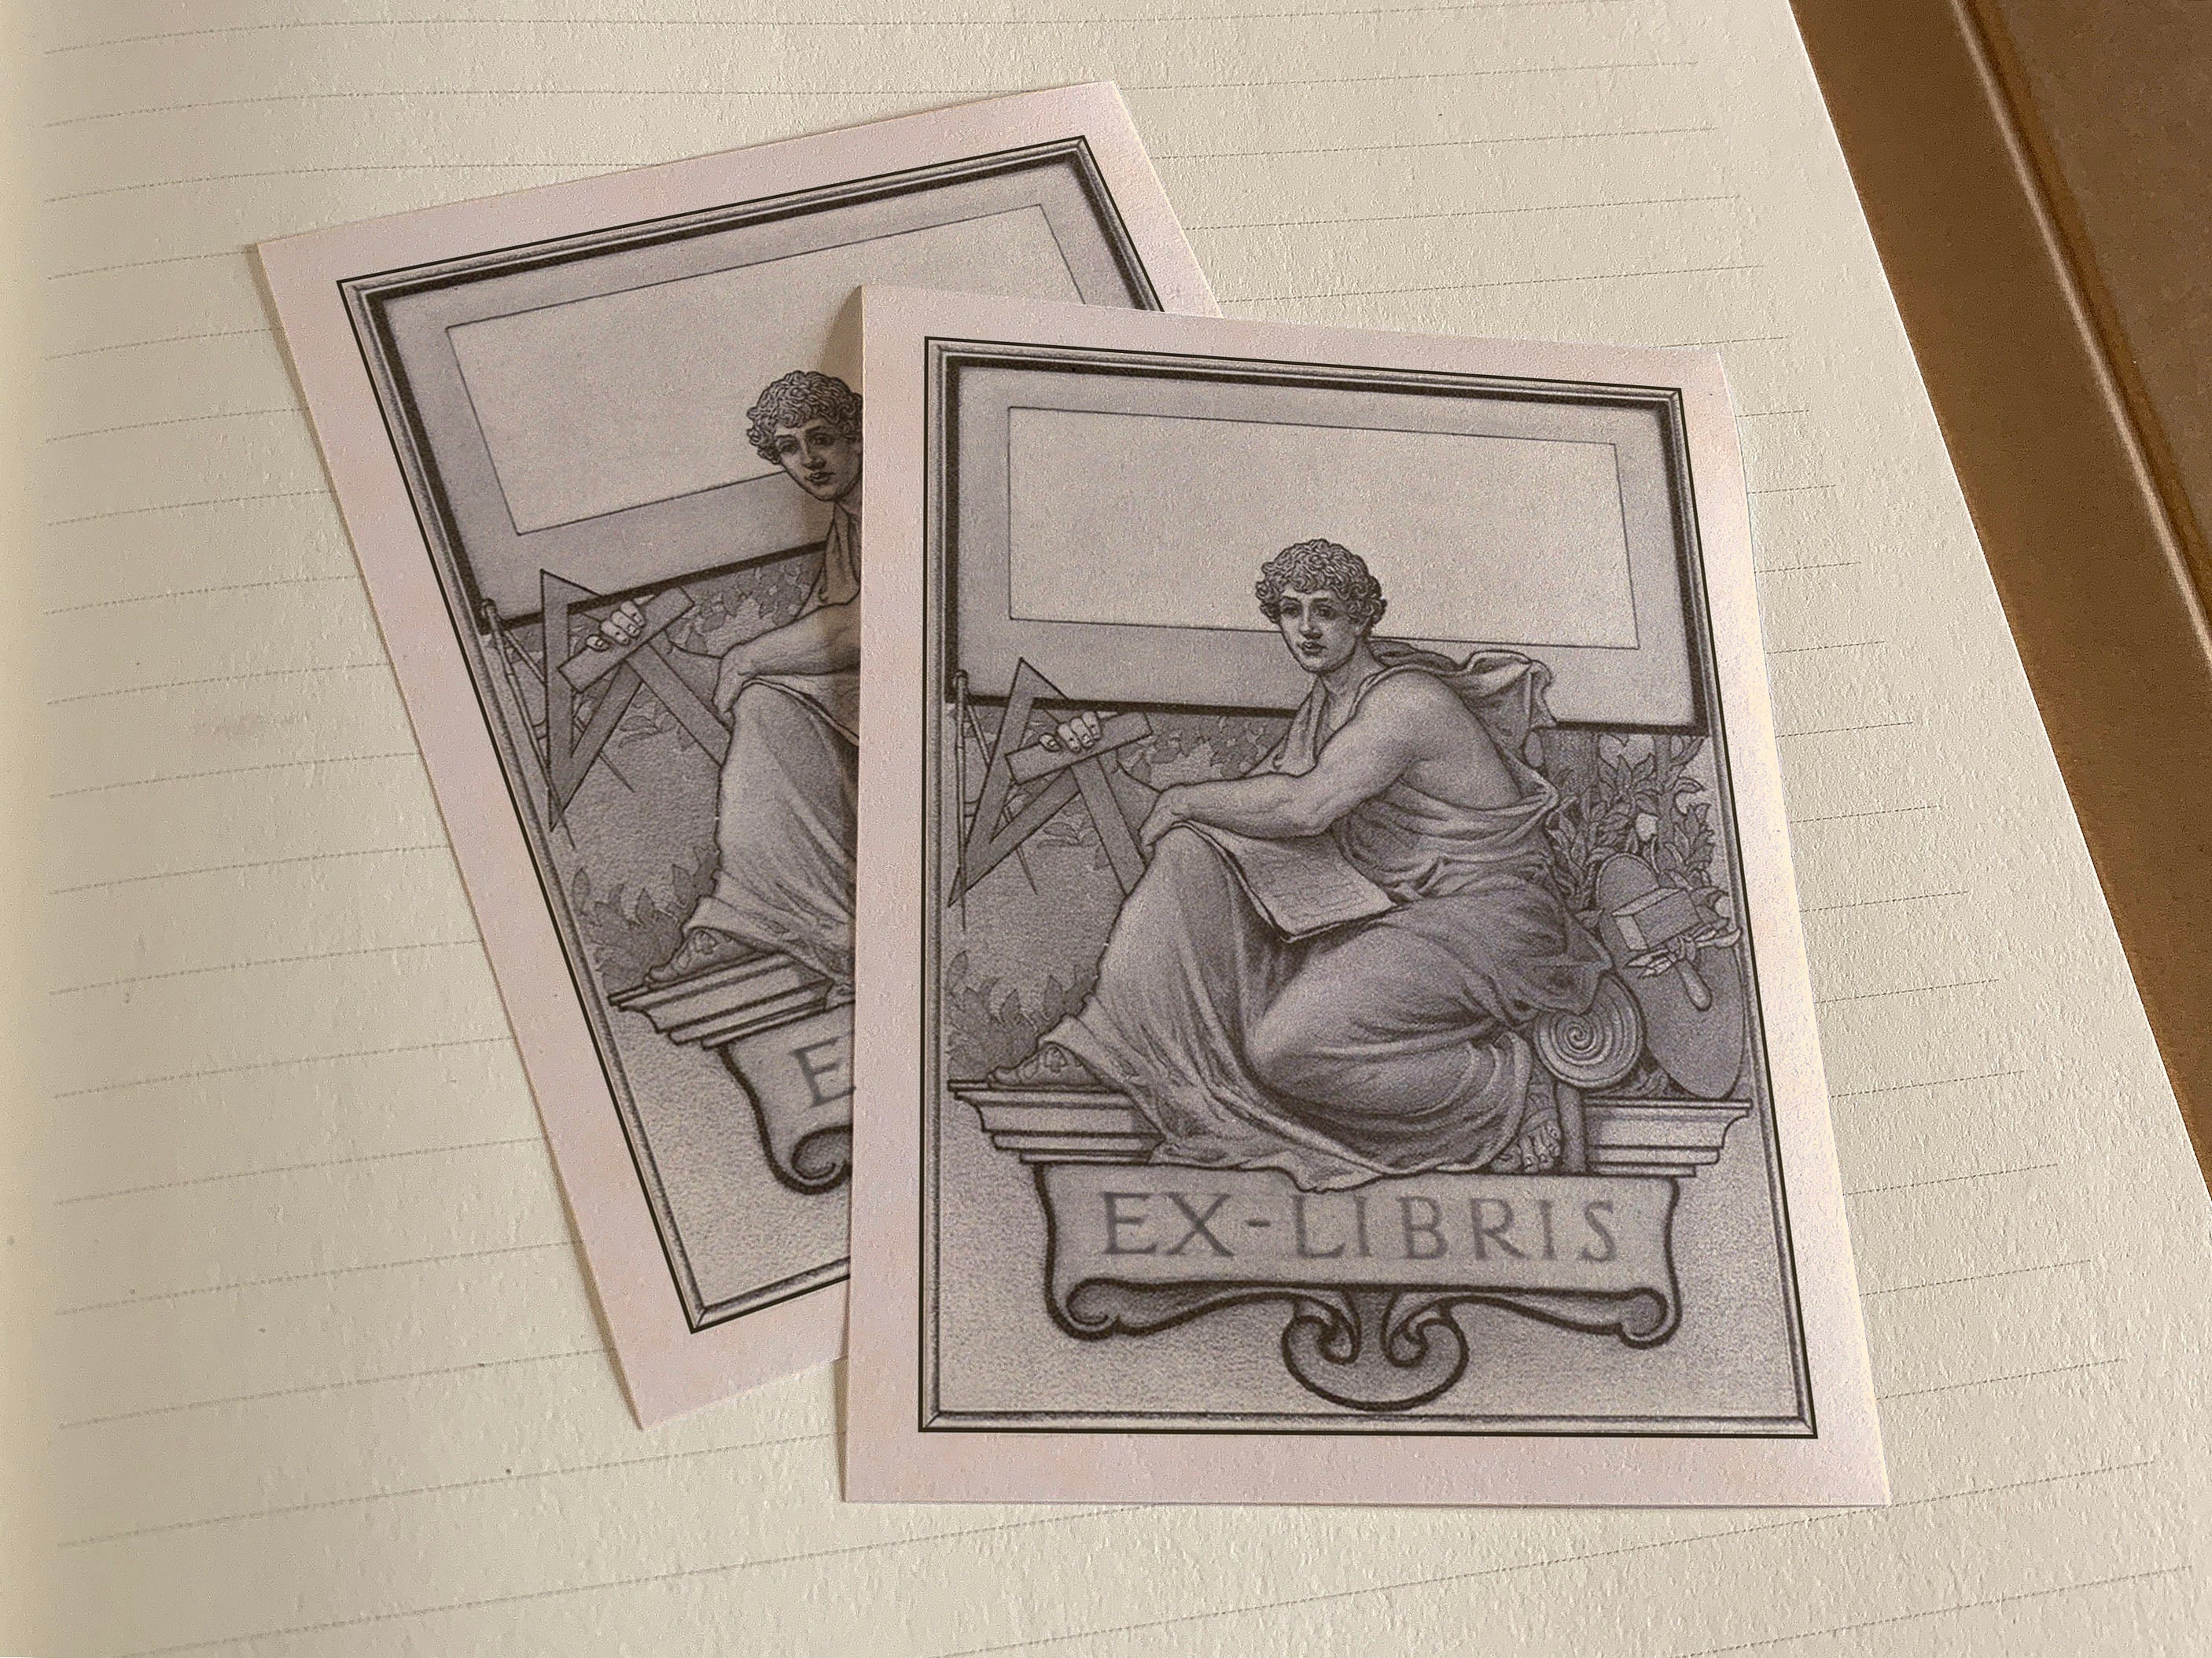 Hephaestus, Geometry and Architecture, Personalized Gothic Ex-Libris Bookplates, Crafted on Traditional Gummed Paper, 3in x 4in, Set of 30